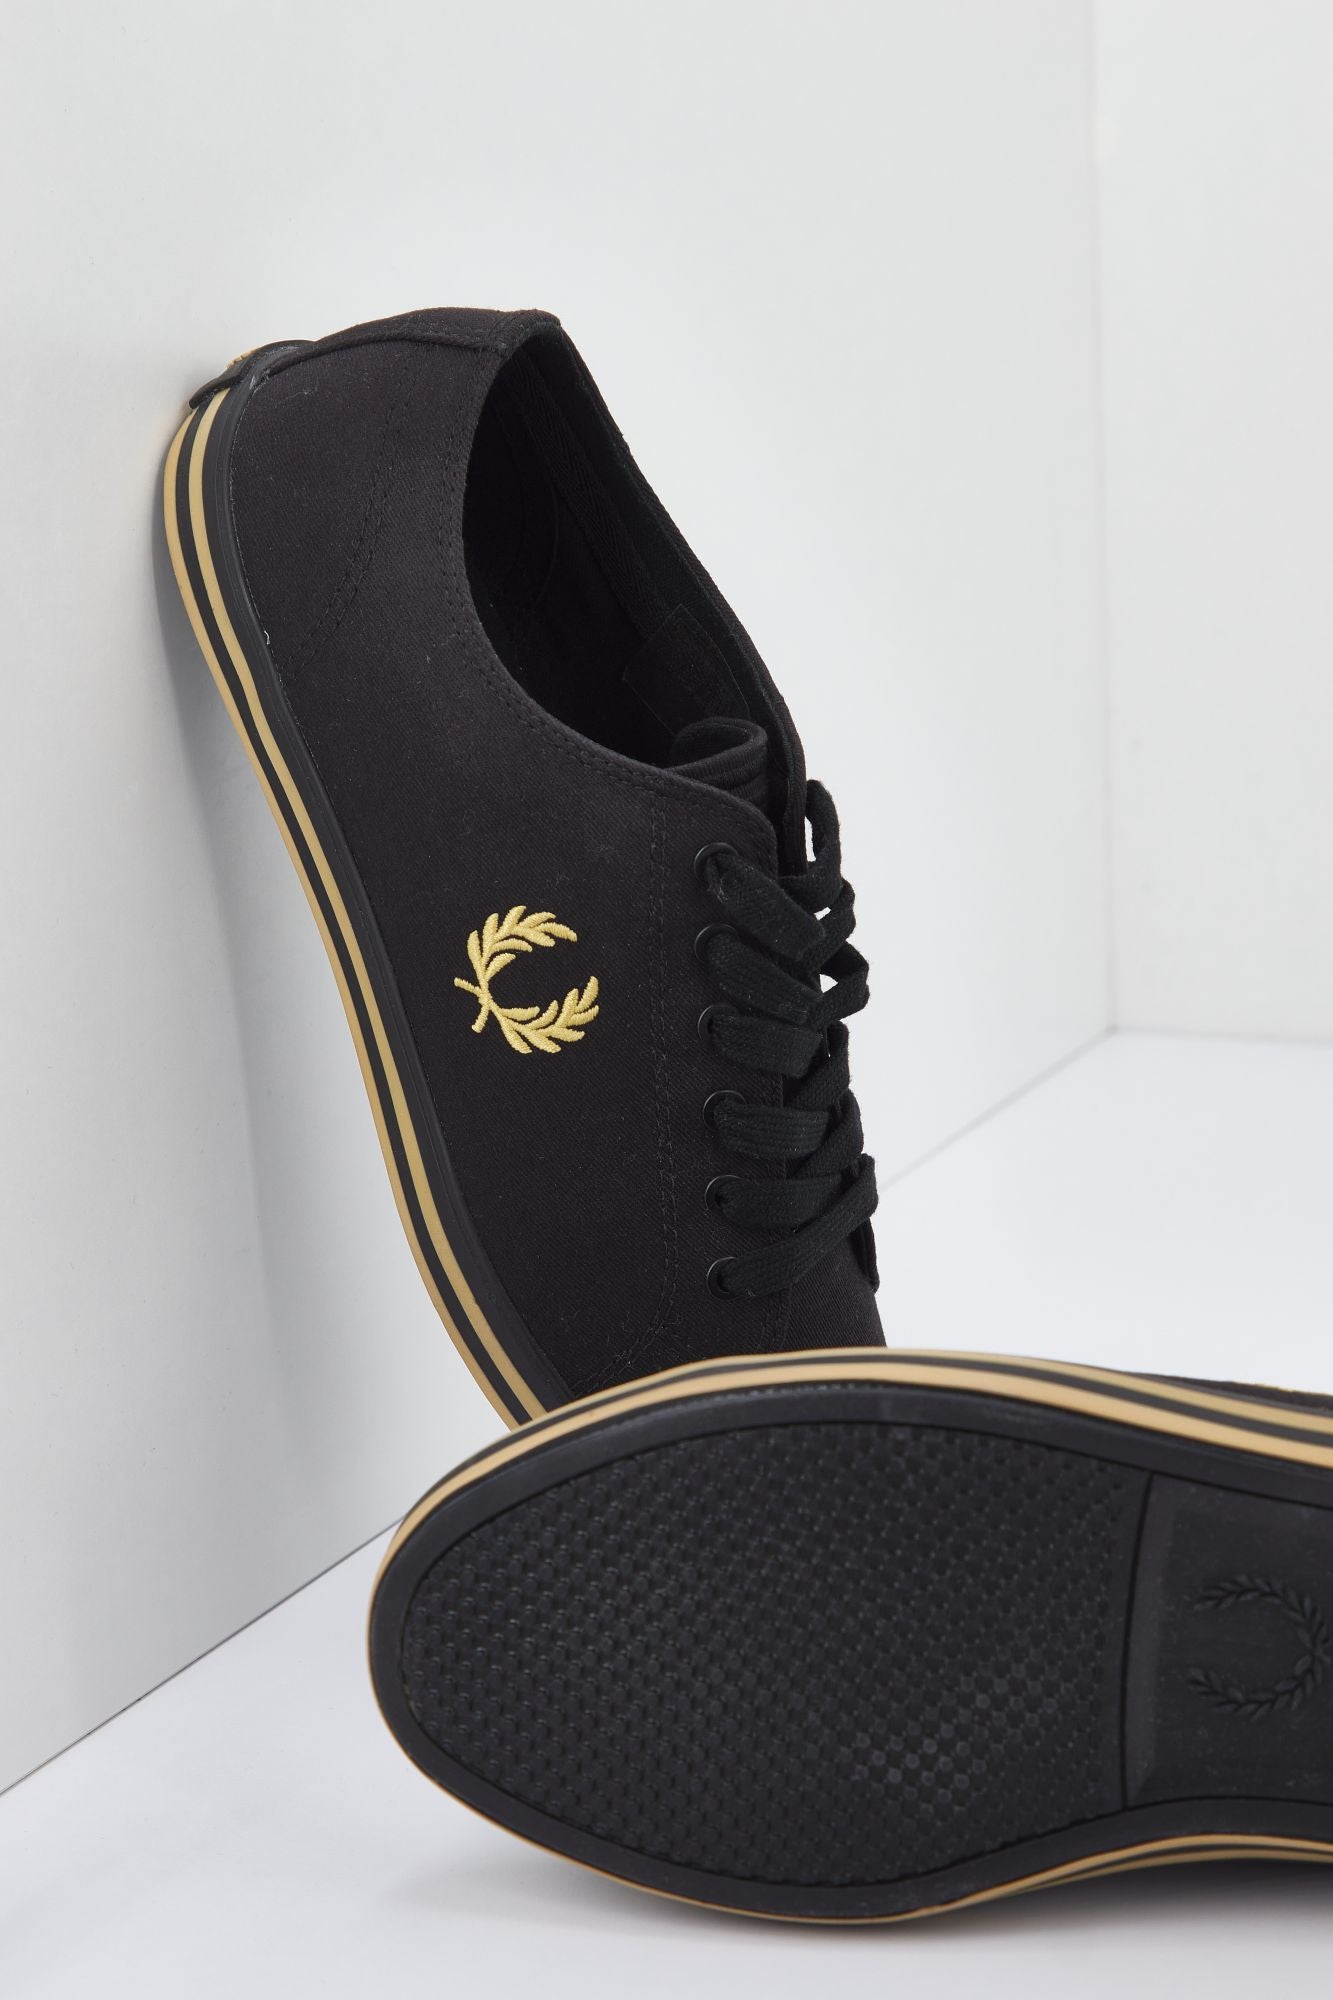 FRED PERRY KINGSTON TWILL en color NEGRO (3)